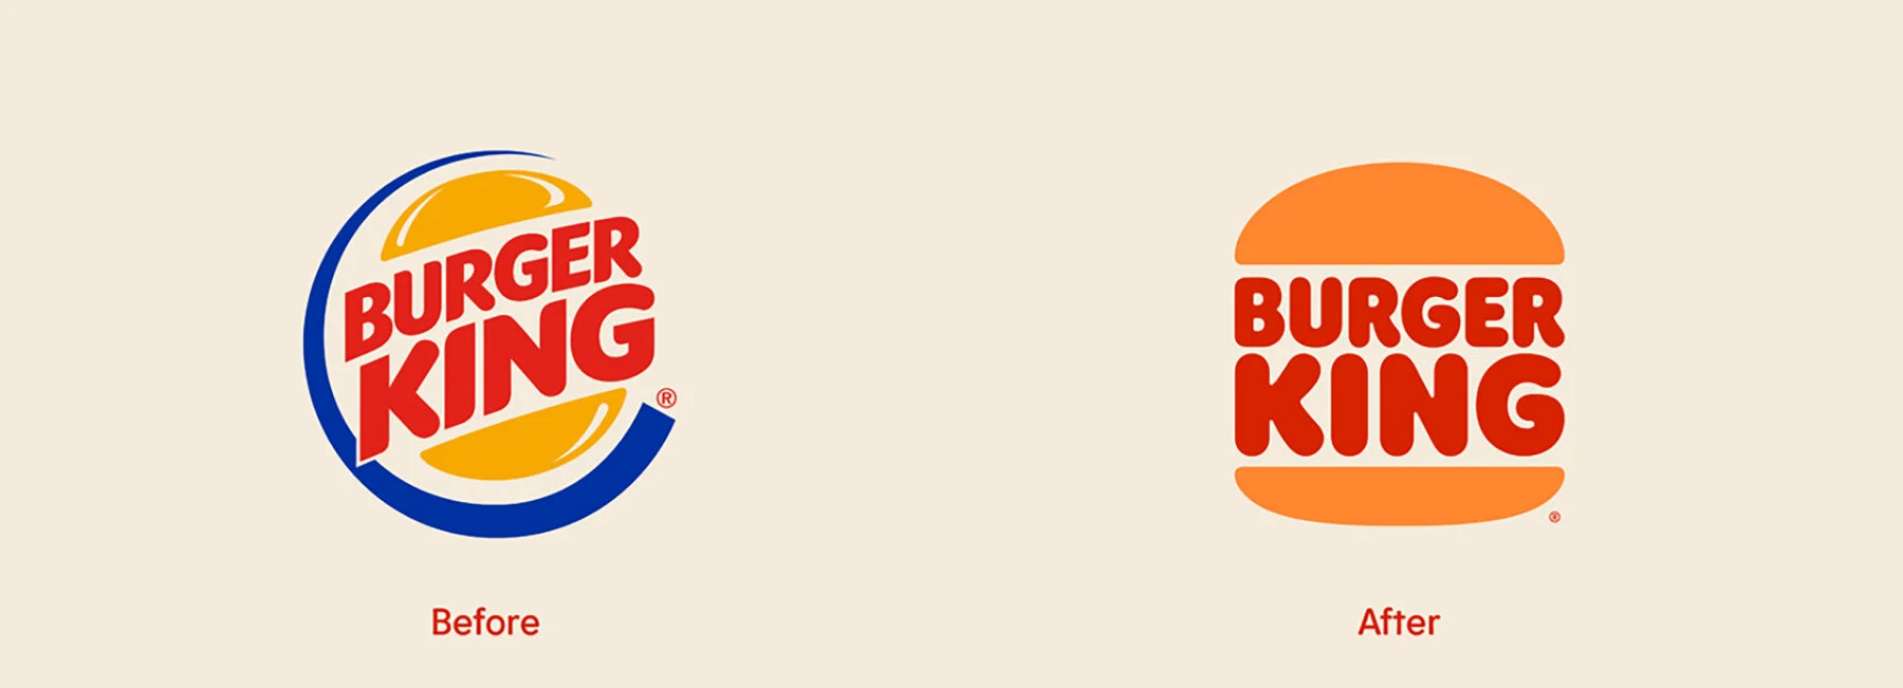 Burger King unveils new logo making it its first rebrand in over 20 years